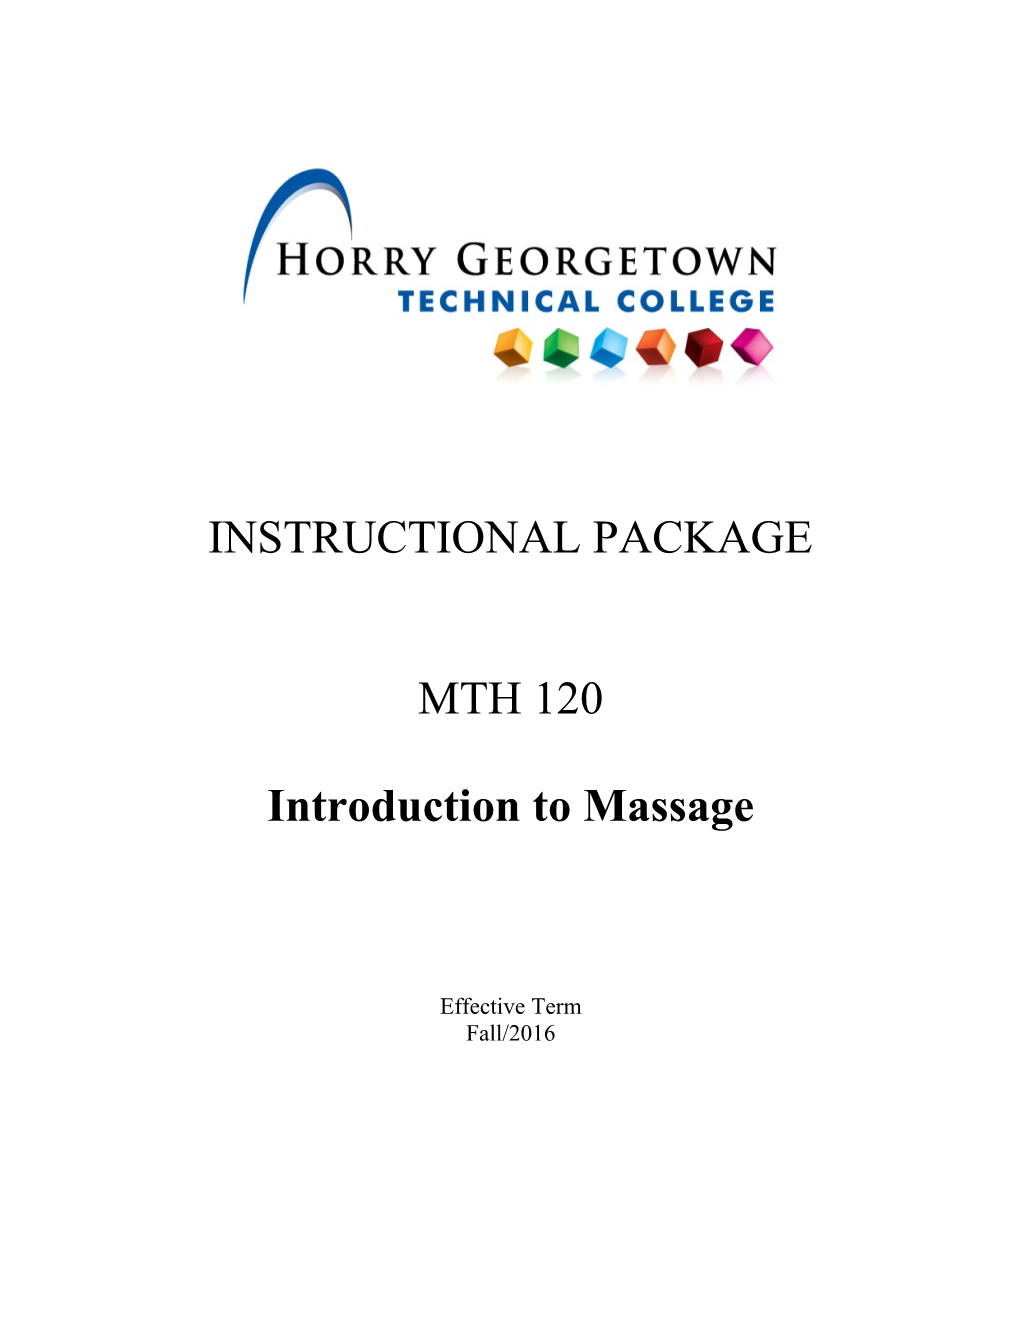 Introduction to Massage